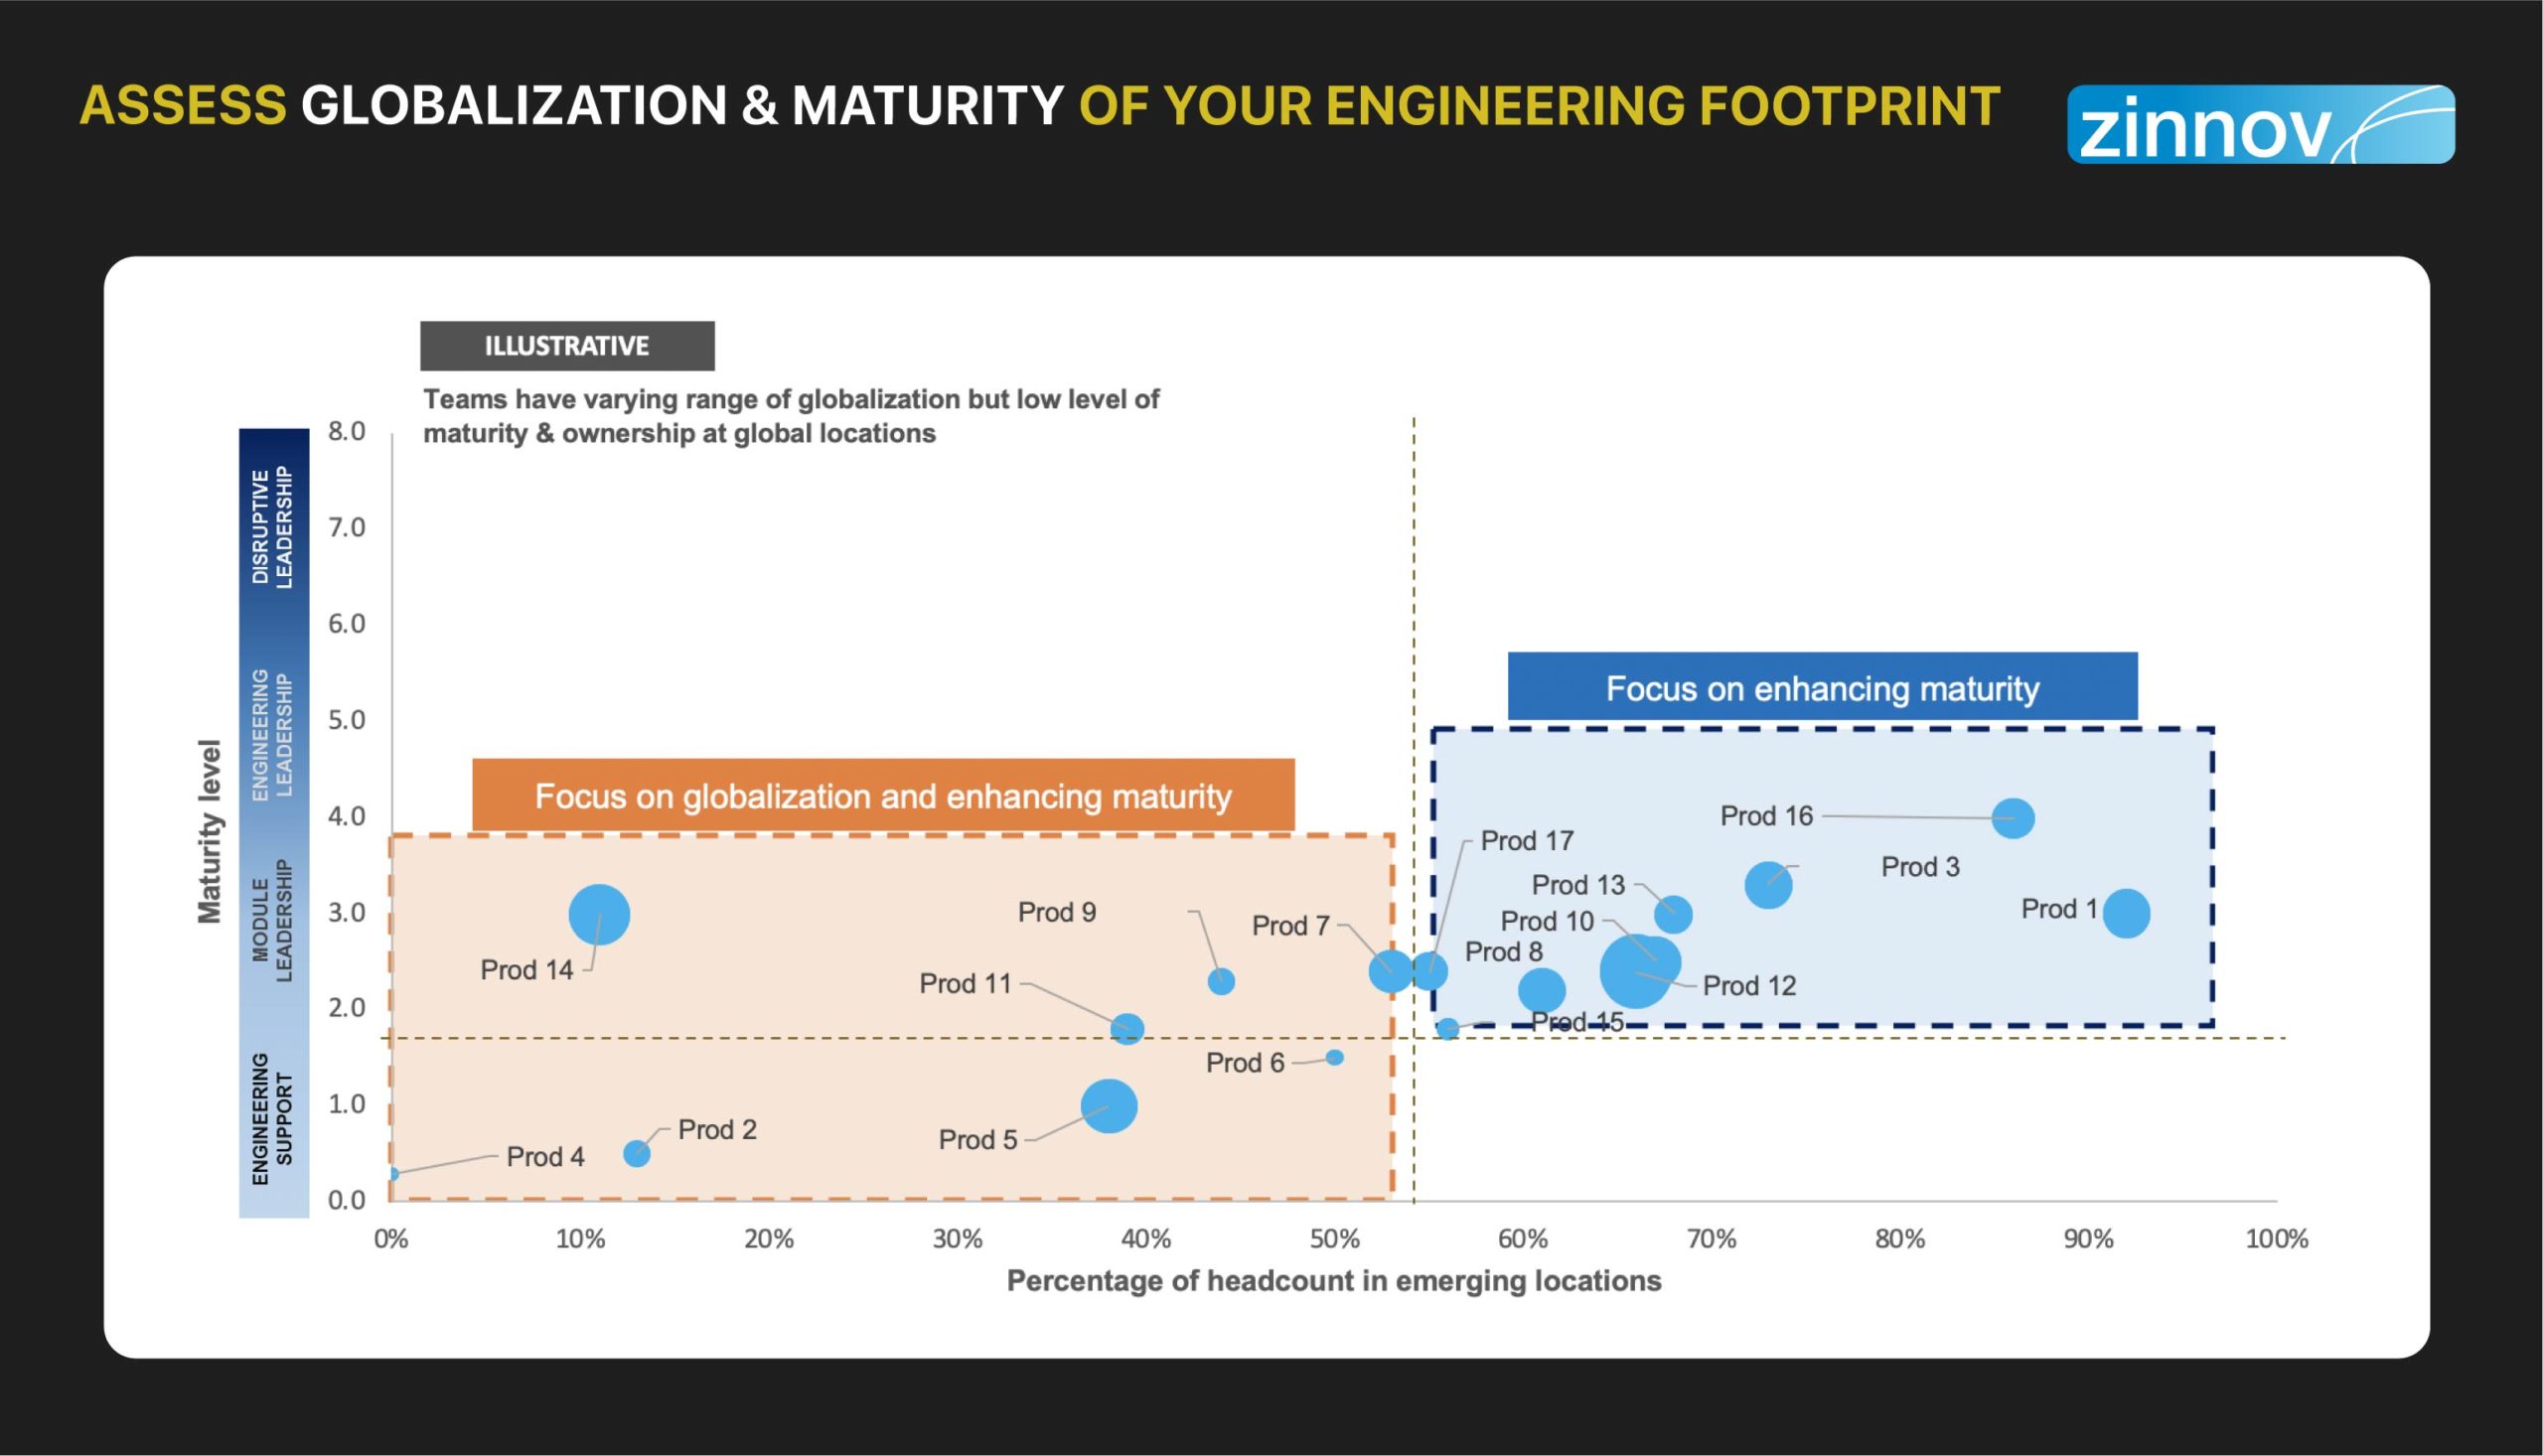 Assess globalisation & maturity of your engineering footprint 